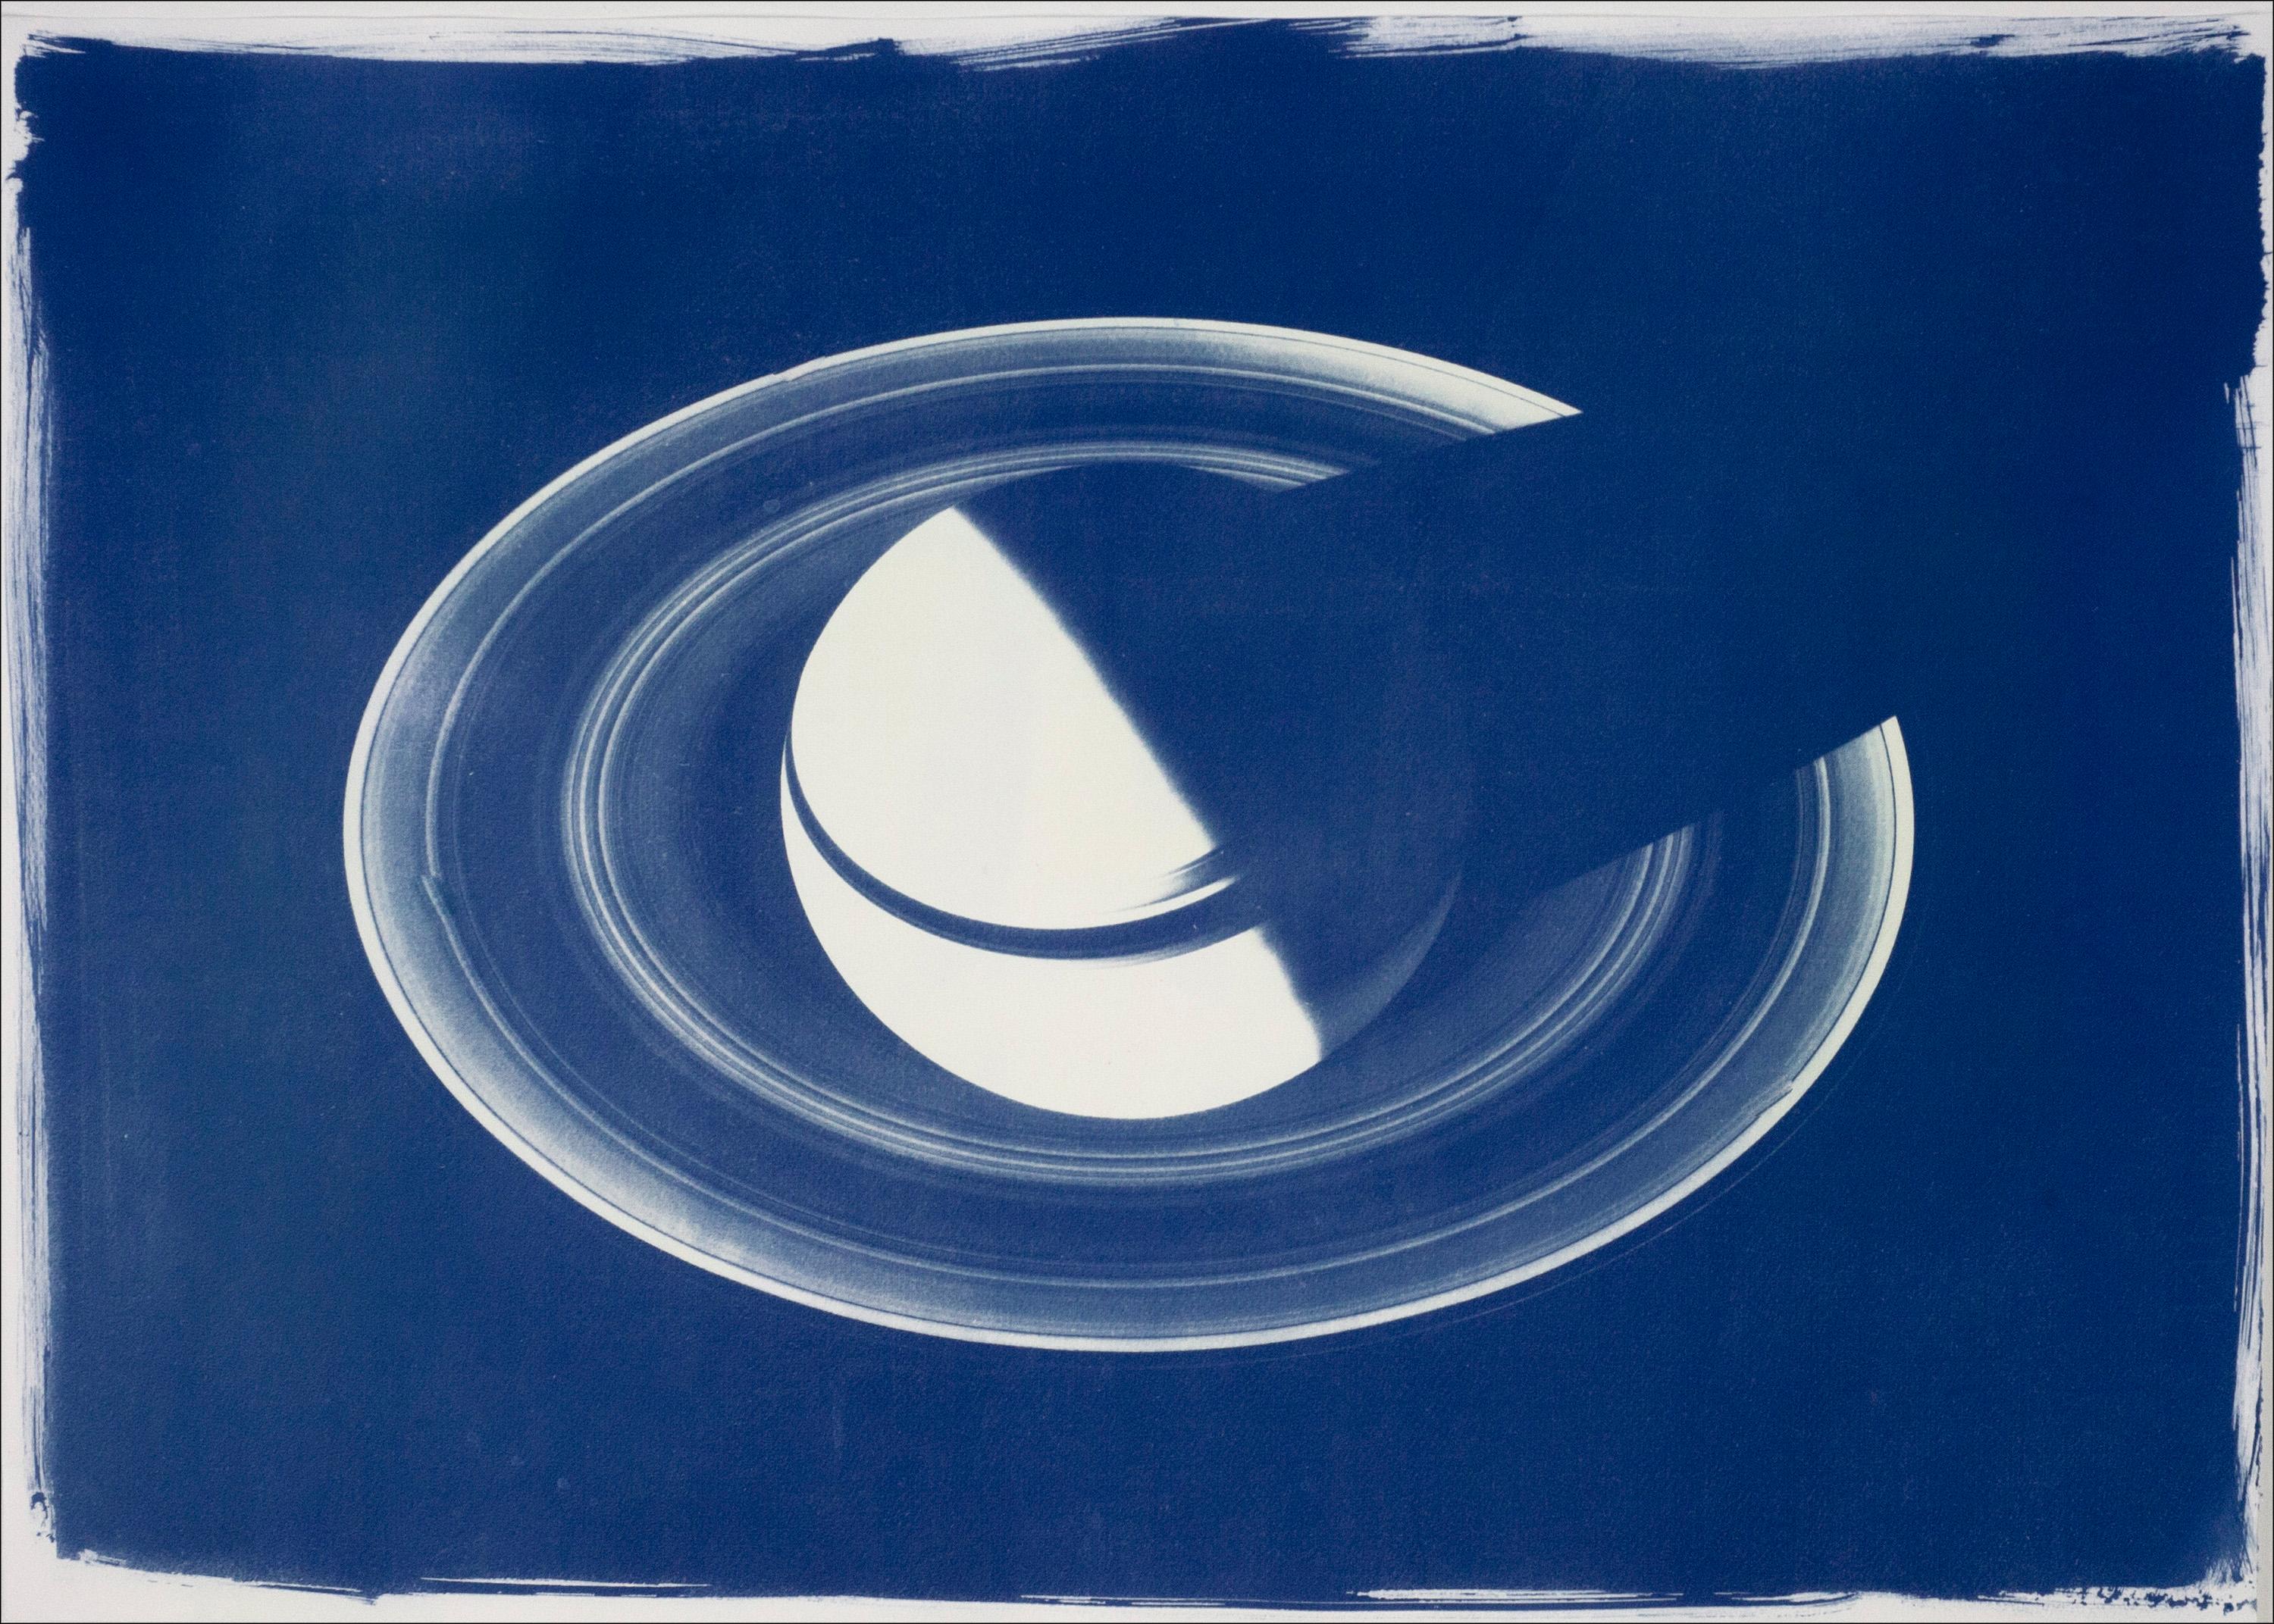 Kind of Cyan Still-Life - Saturn With Rings, Cyanotype on Watercolor Paper, 100x70cm, Space Art